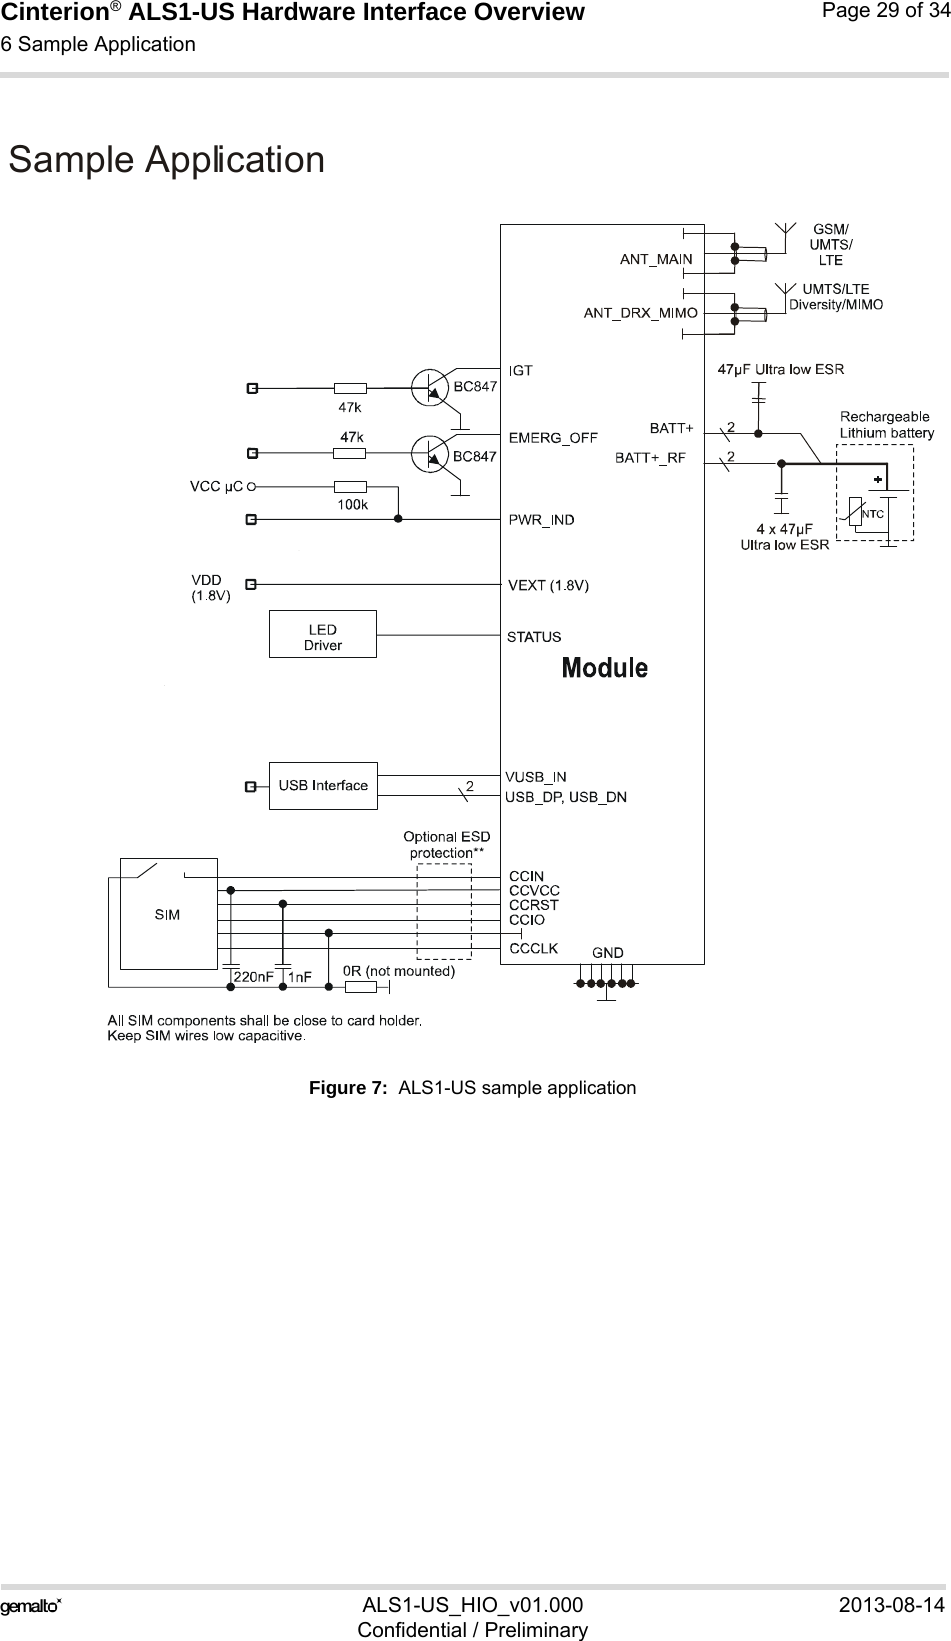 Cinterion® ALS1-US Hardware Interface Overview6 Sample Application29ALS1-US_HIO_v01.000 2013-08-14Confidential / PreliminaryPage 29 of 34Figure 7:  ALS1-US sample applicationSample Application 